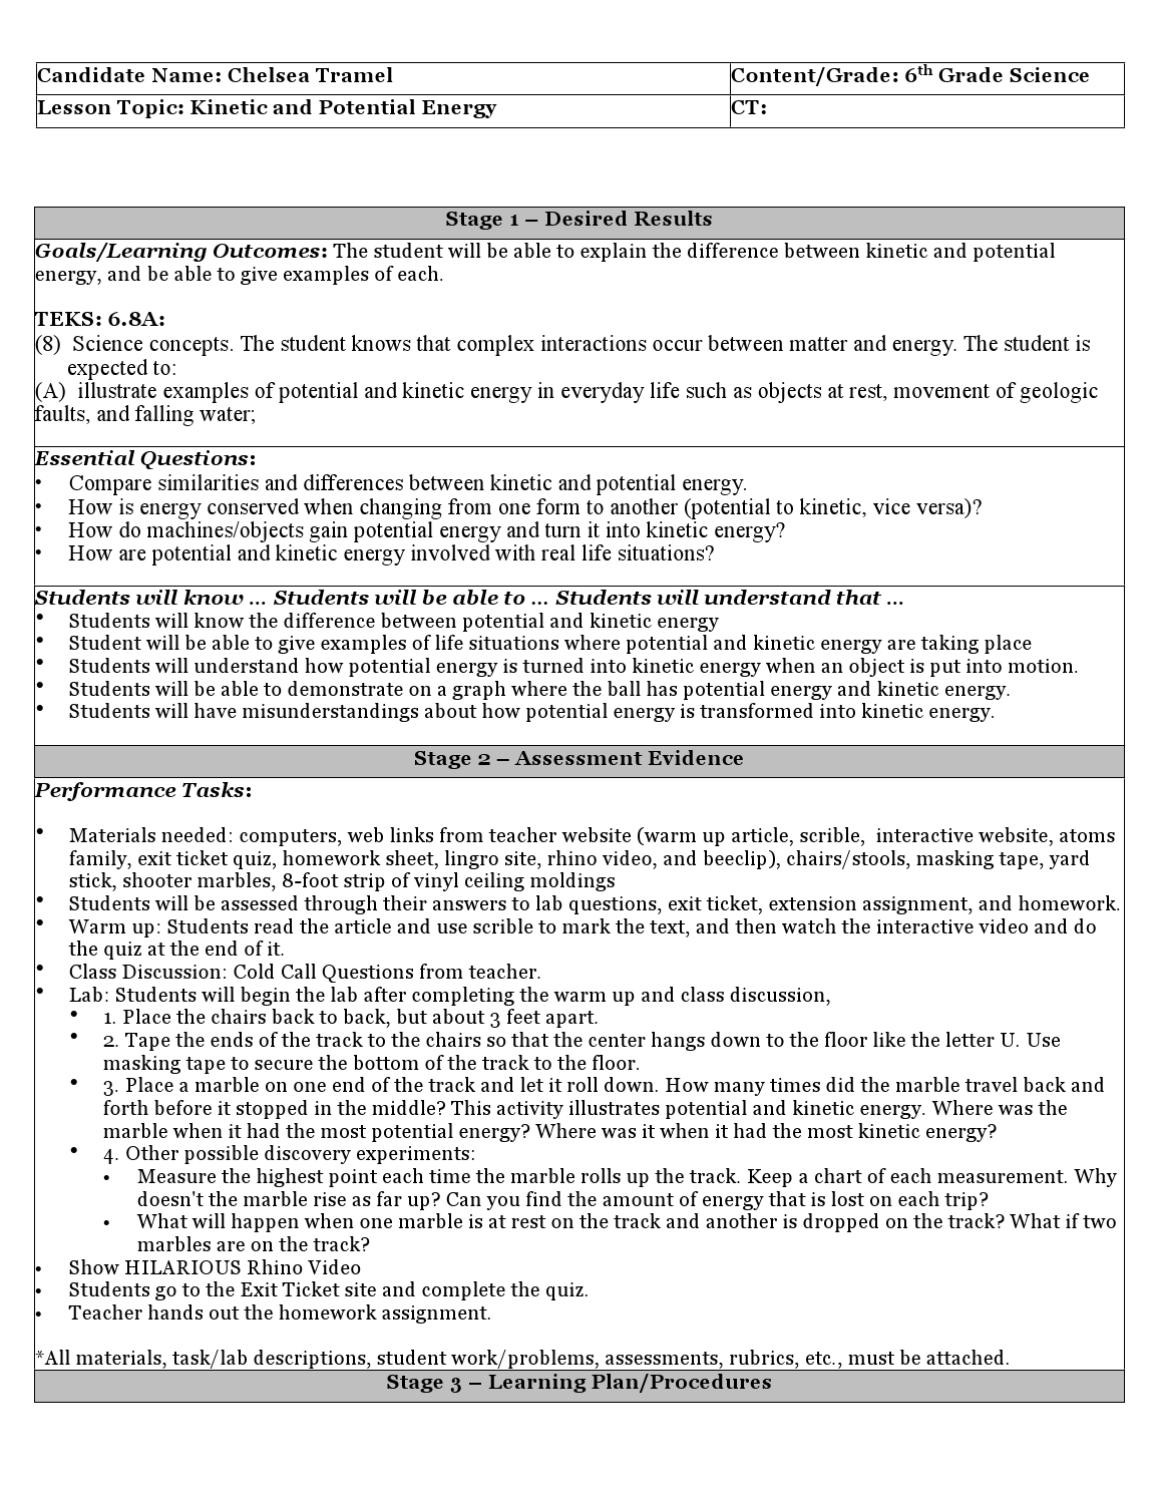 Potential Vs Kinetic Energy Worksheet Kinetic and Potential Energy Lesson Plan by Chelsea Tramel